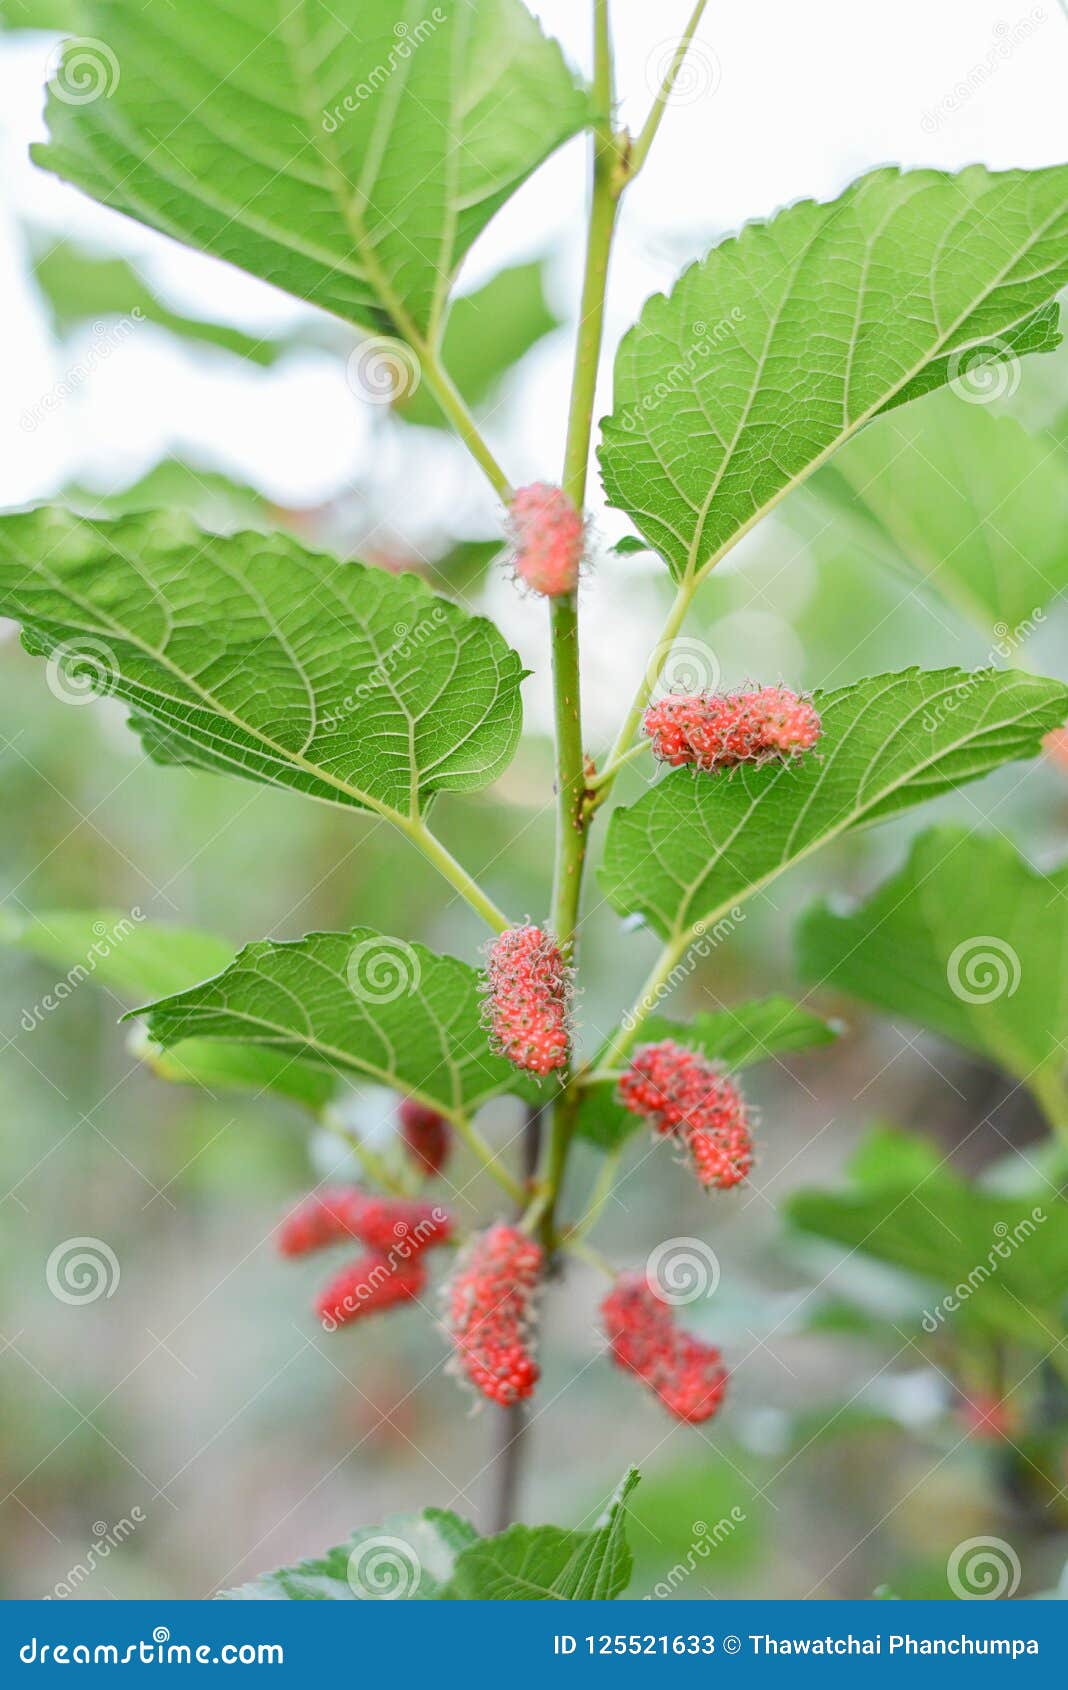 Red Mulberry Fruit Berry in Farm. Stock Image - Image of branch: 125521633